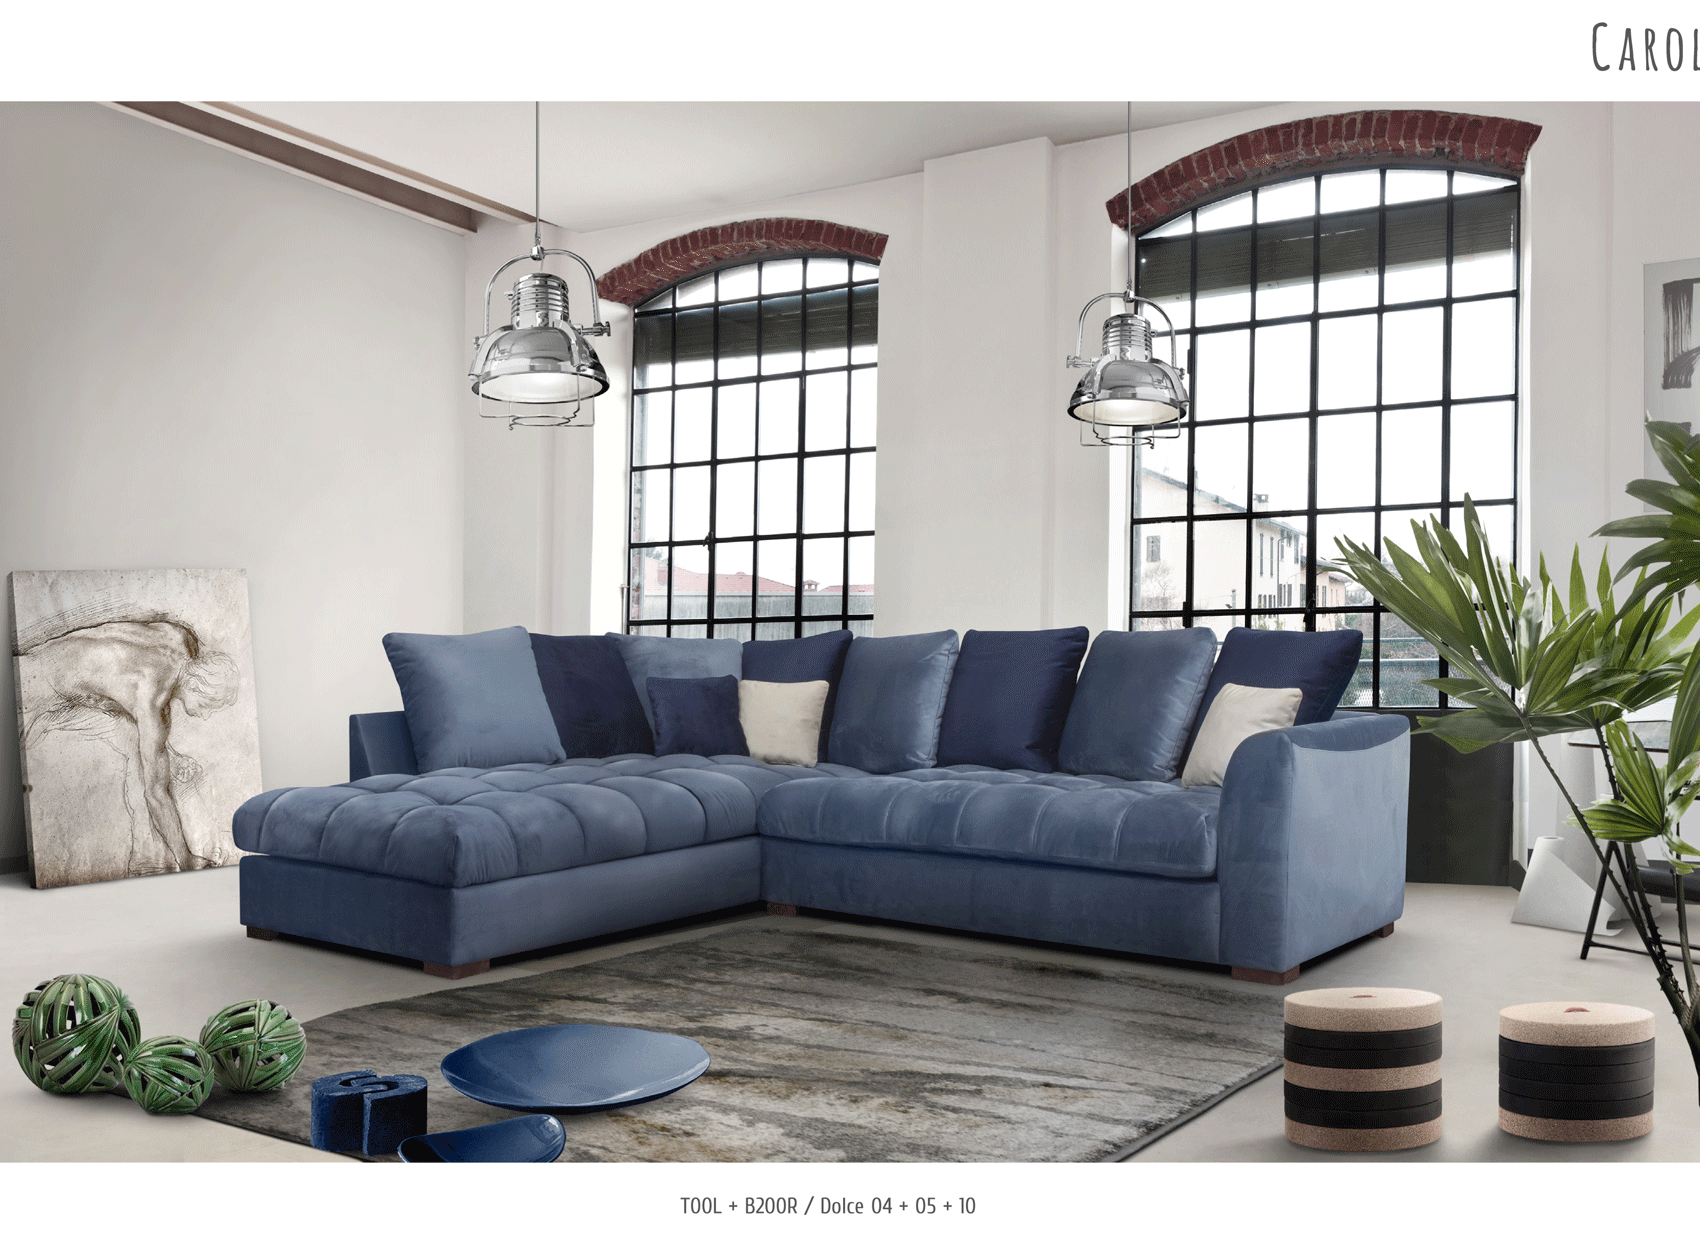 Living Room Furniture Sleepers Sofas Loveseats and Chairs Carol Sectional